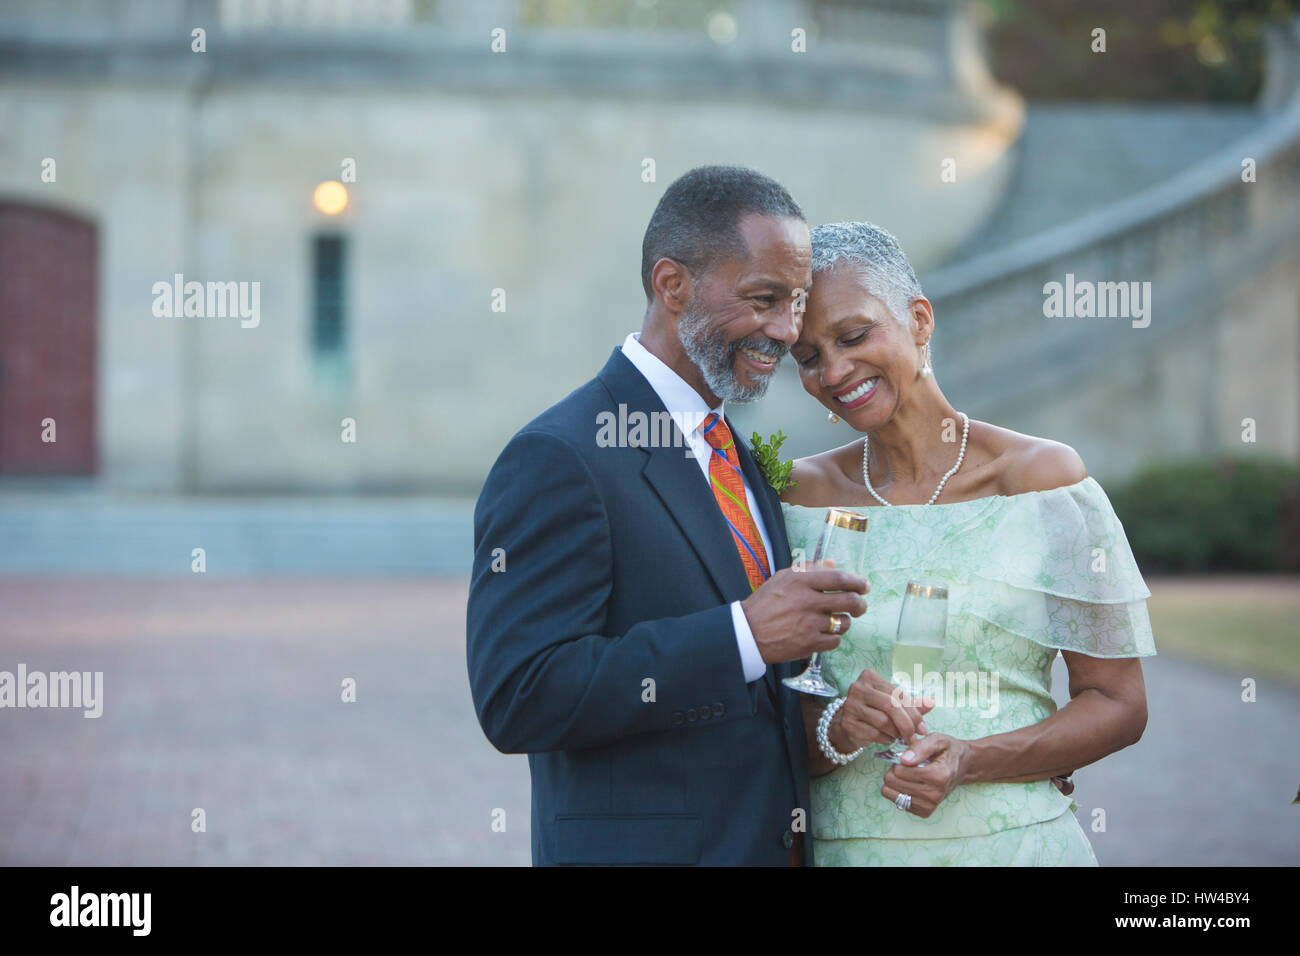 Black couple drinking champagne Stock Photo